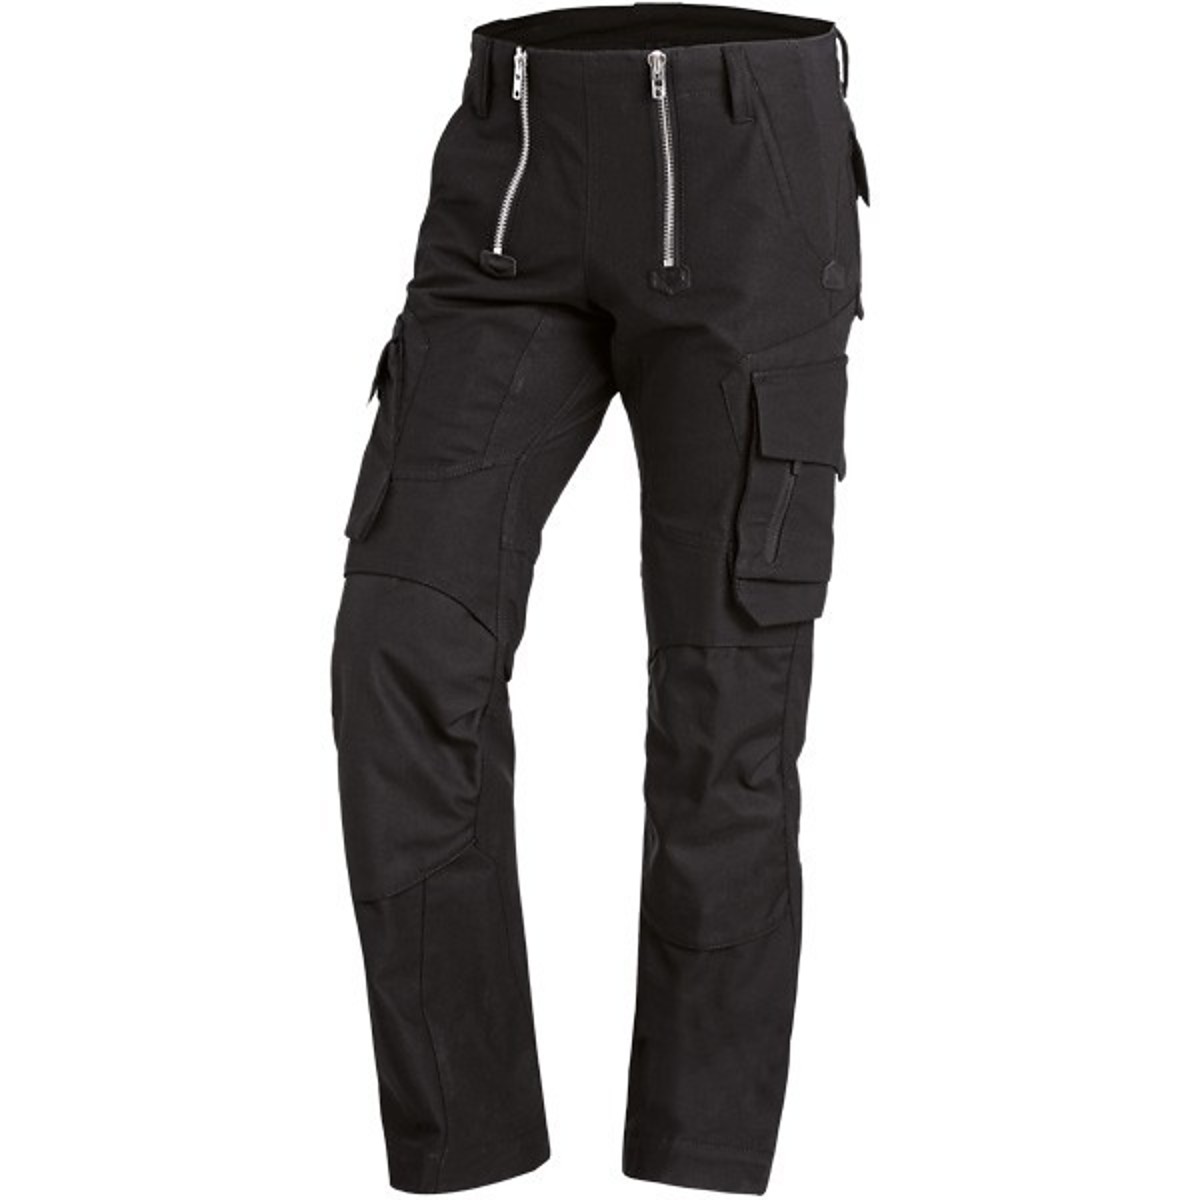 FHB guild trousers with CORDURA® knee pads